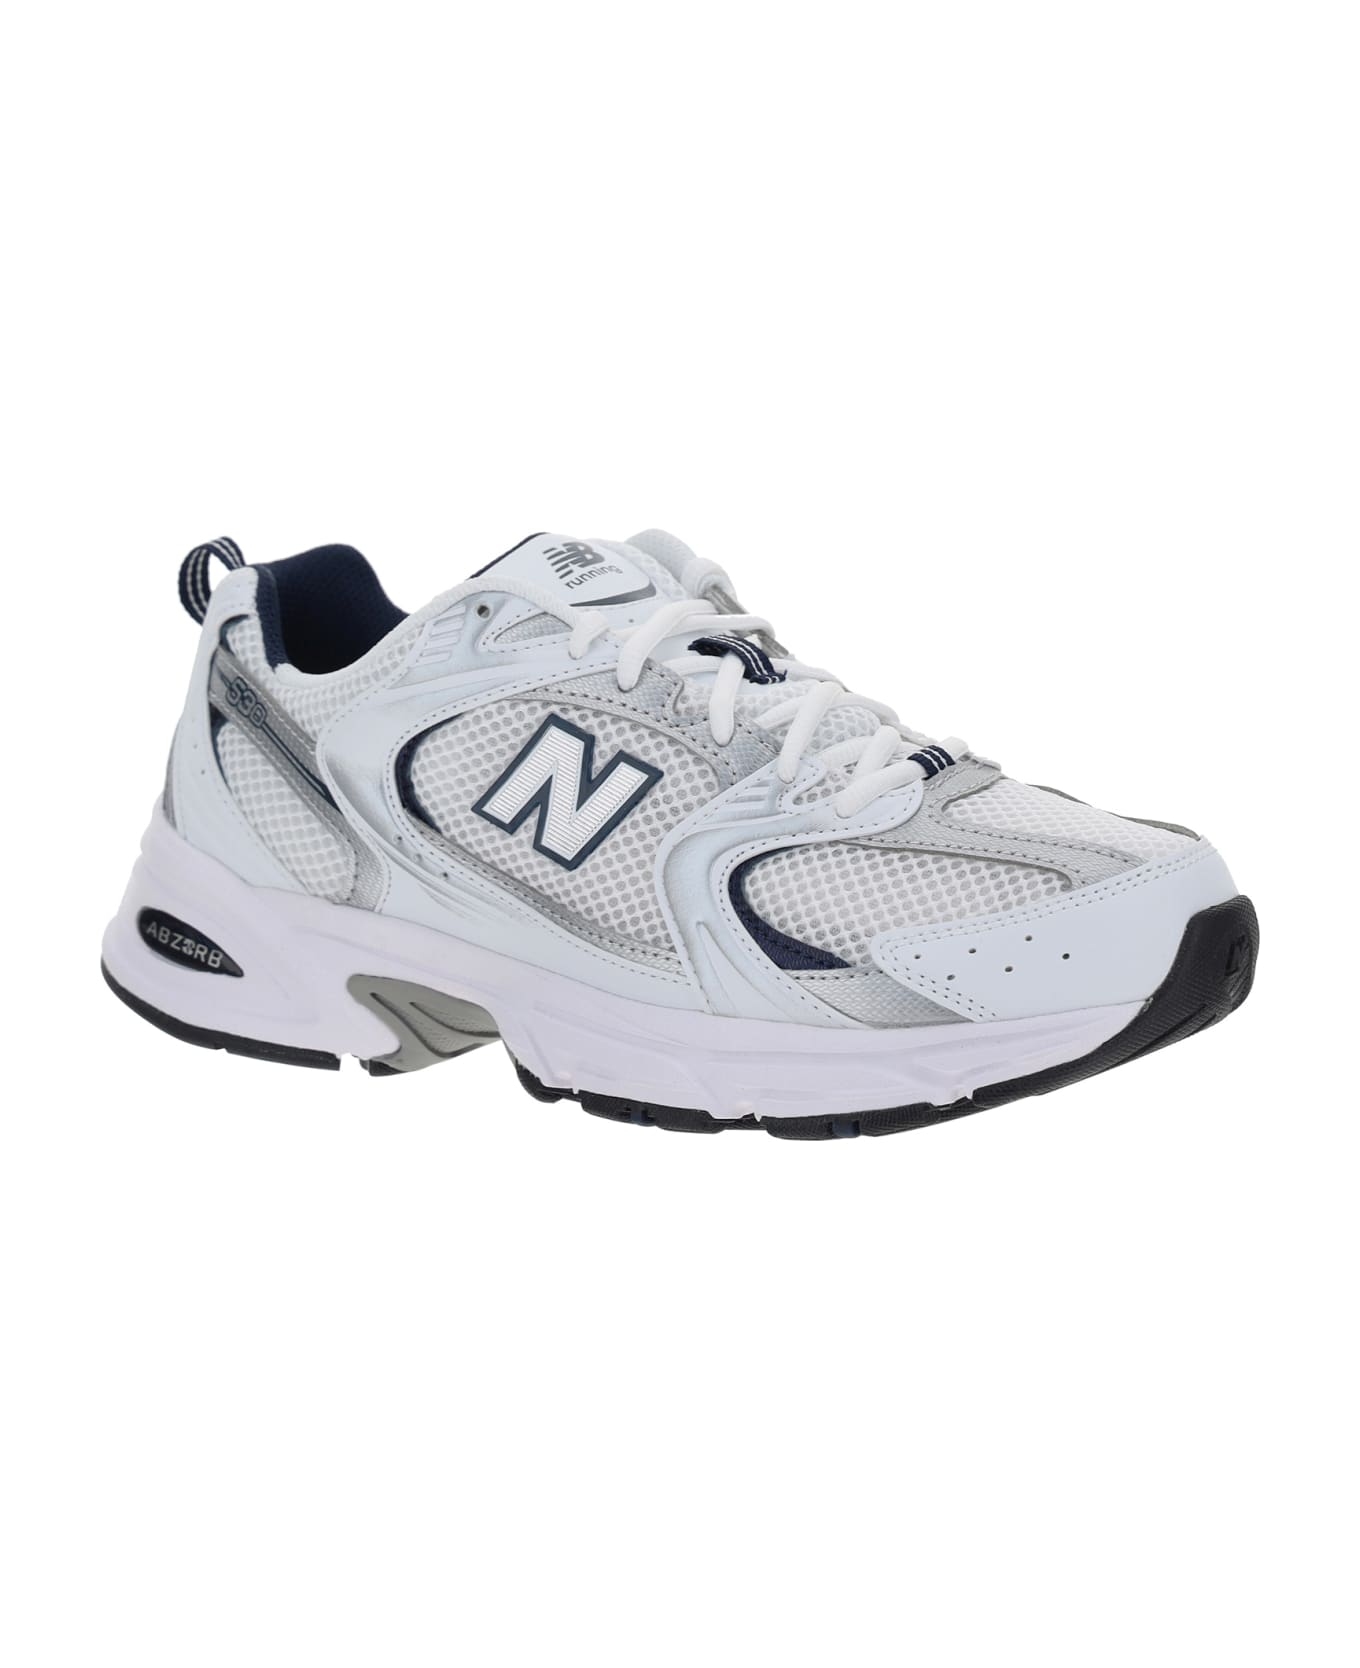 New Balance Lifestyle Sneakers - White/blue D スニーカー